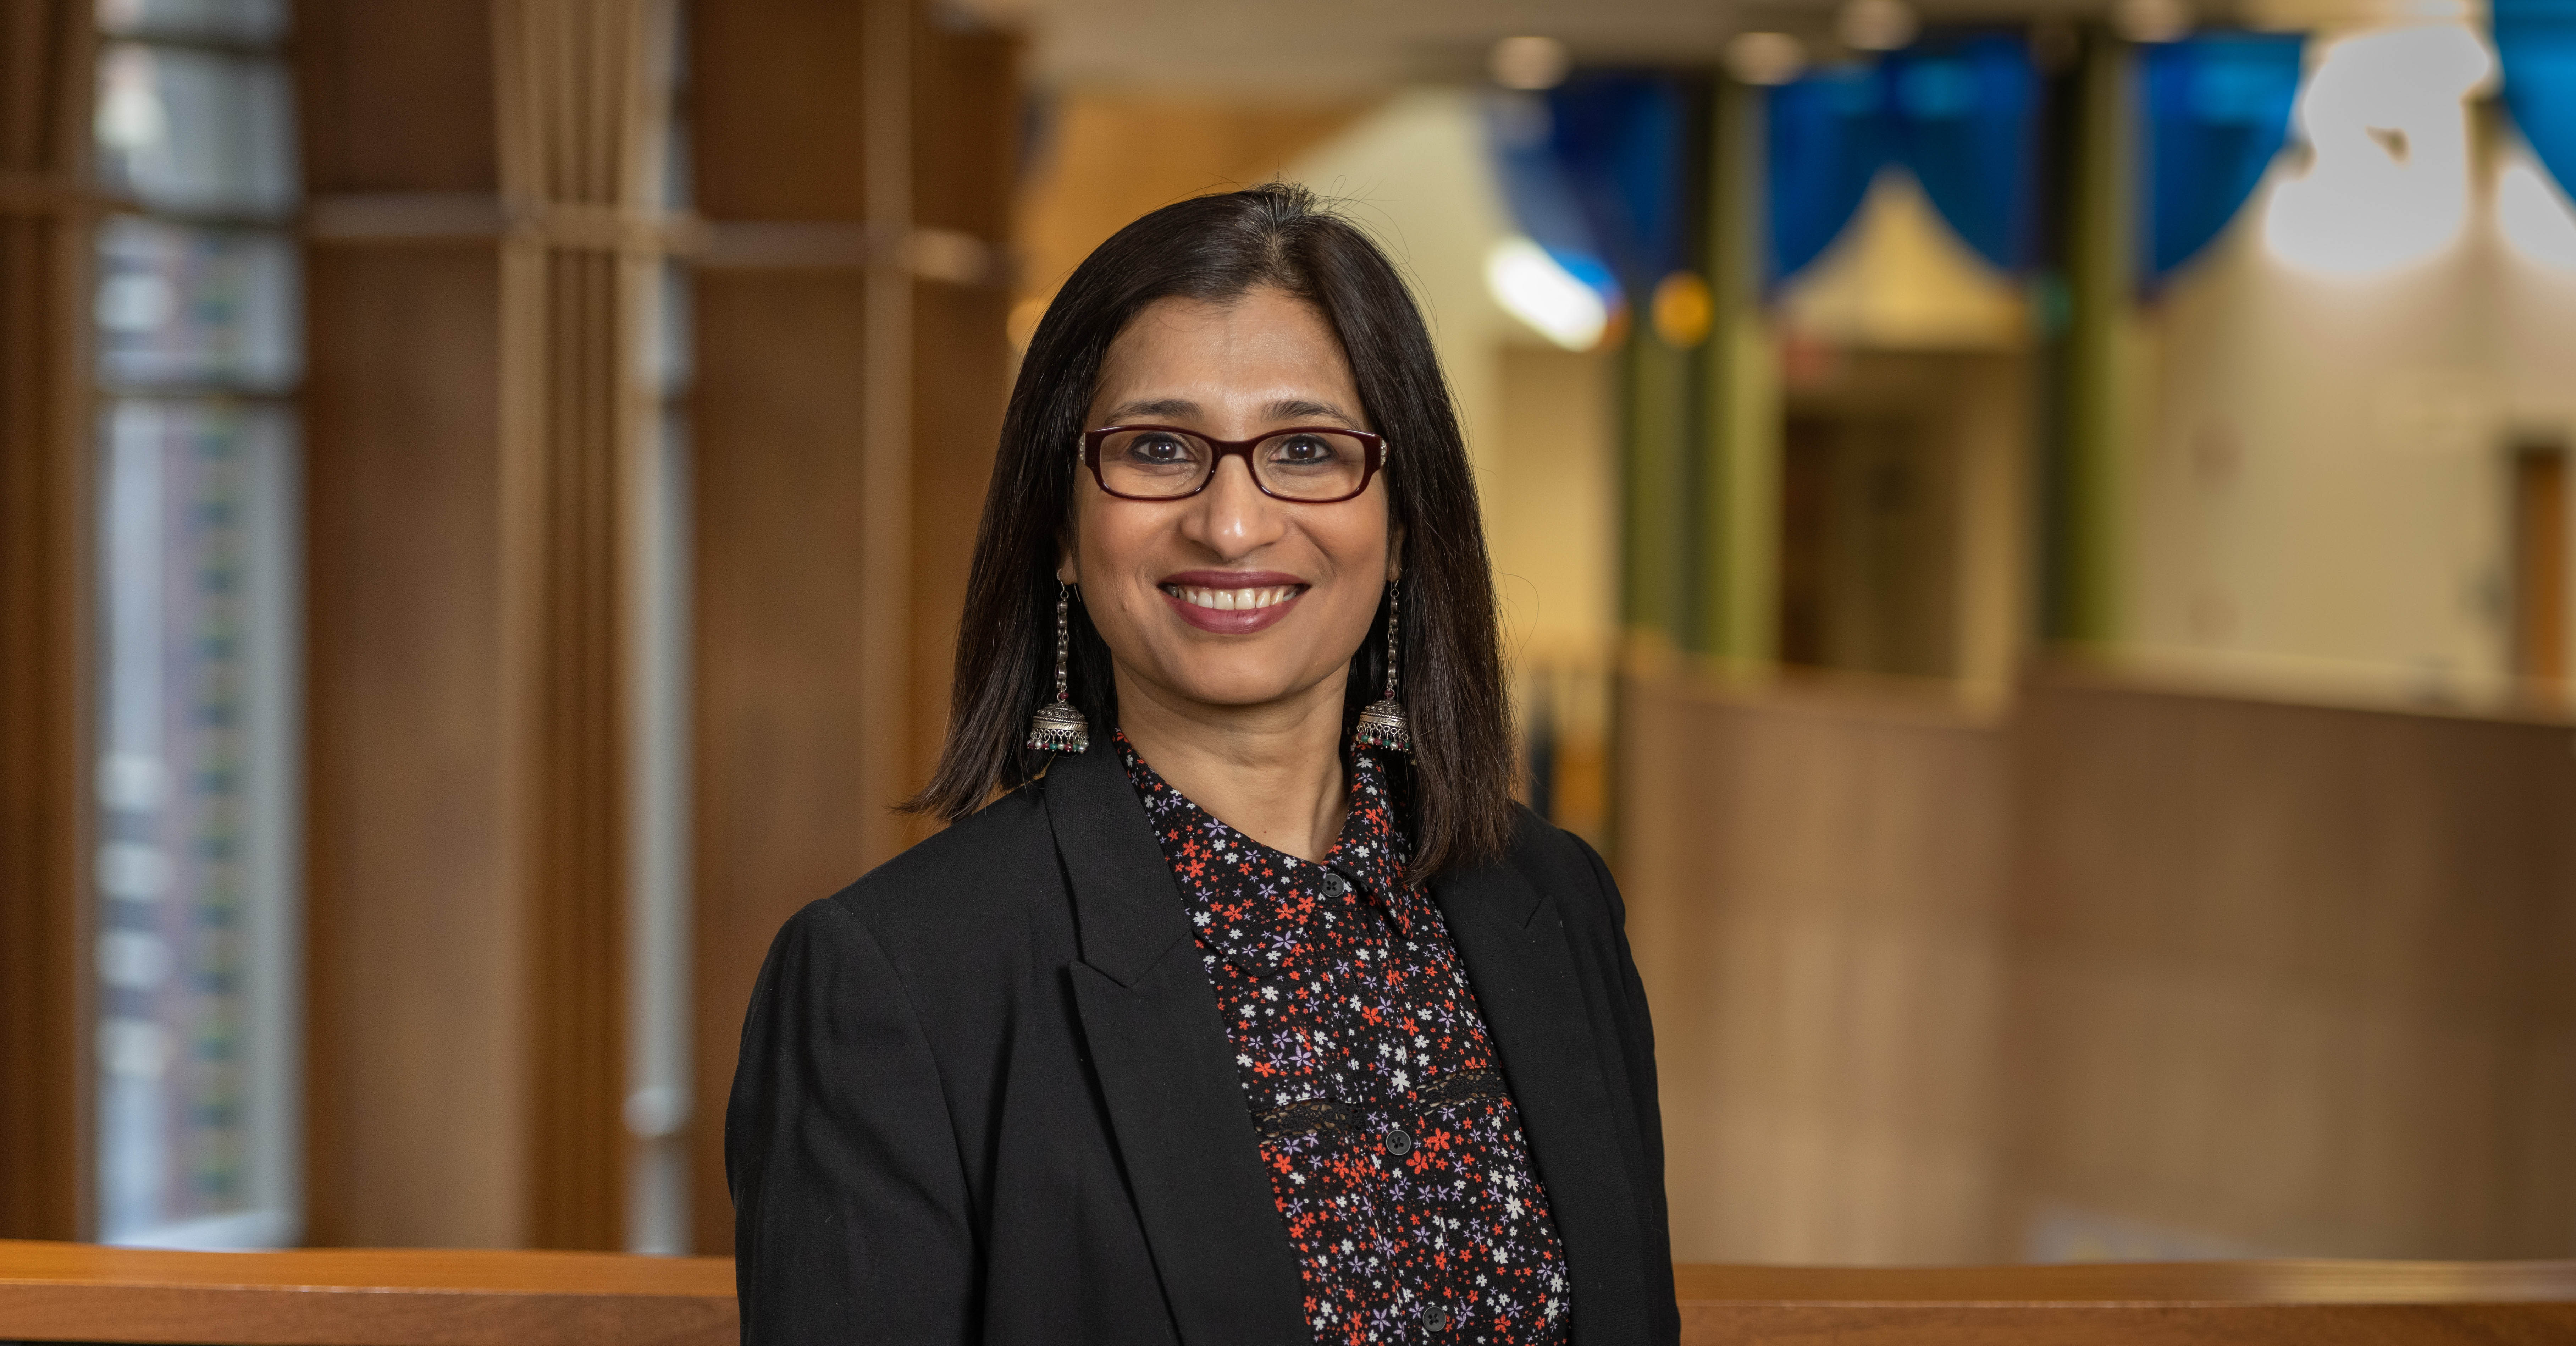 Bhramar Mukherjee to Lead Data Science and Data Equity at Yale School of Public Health